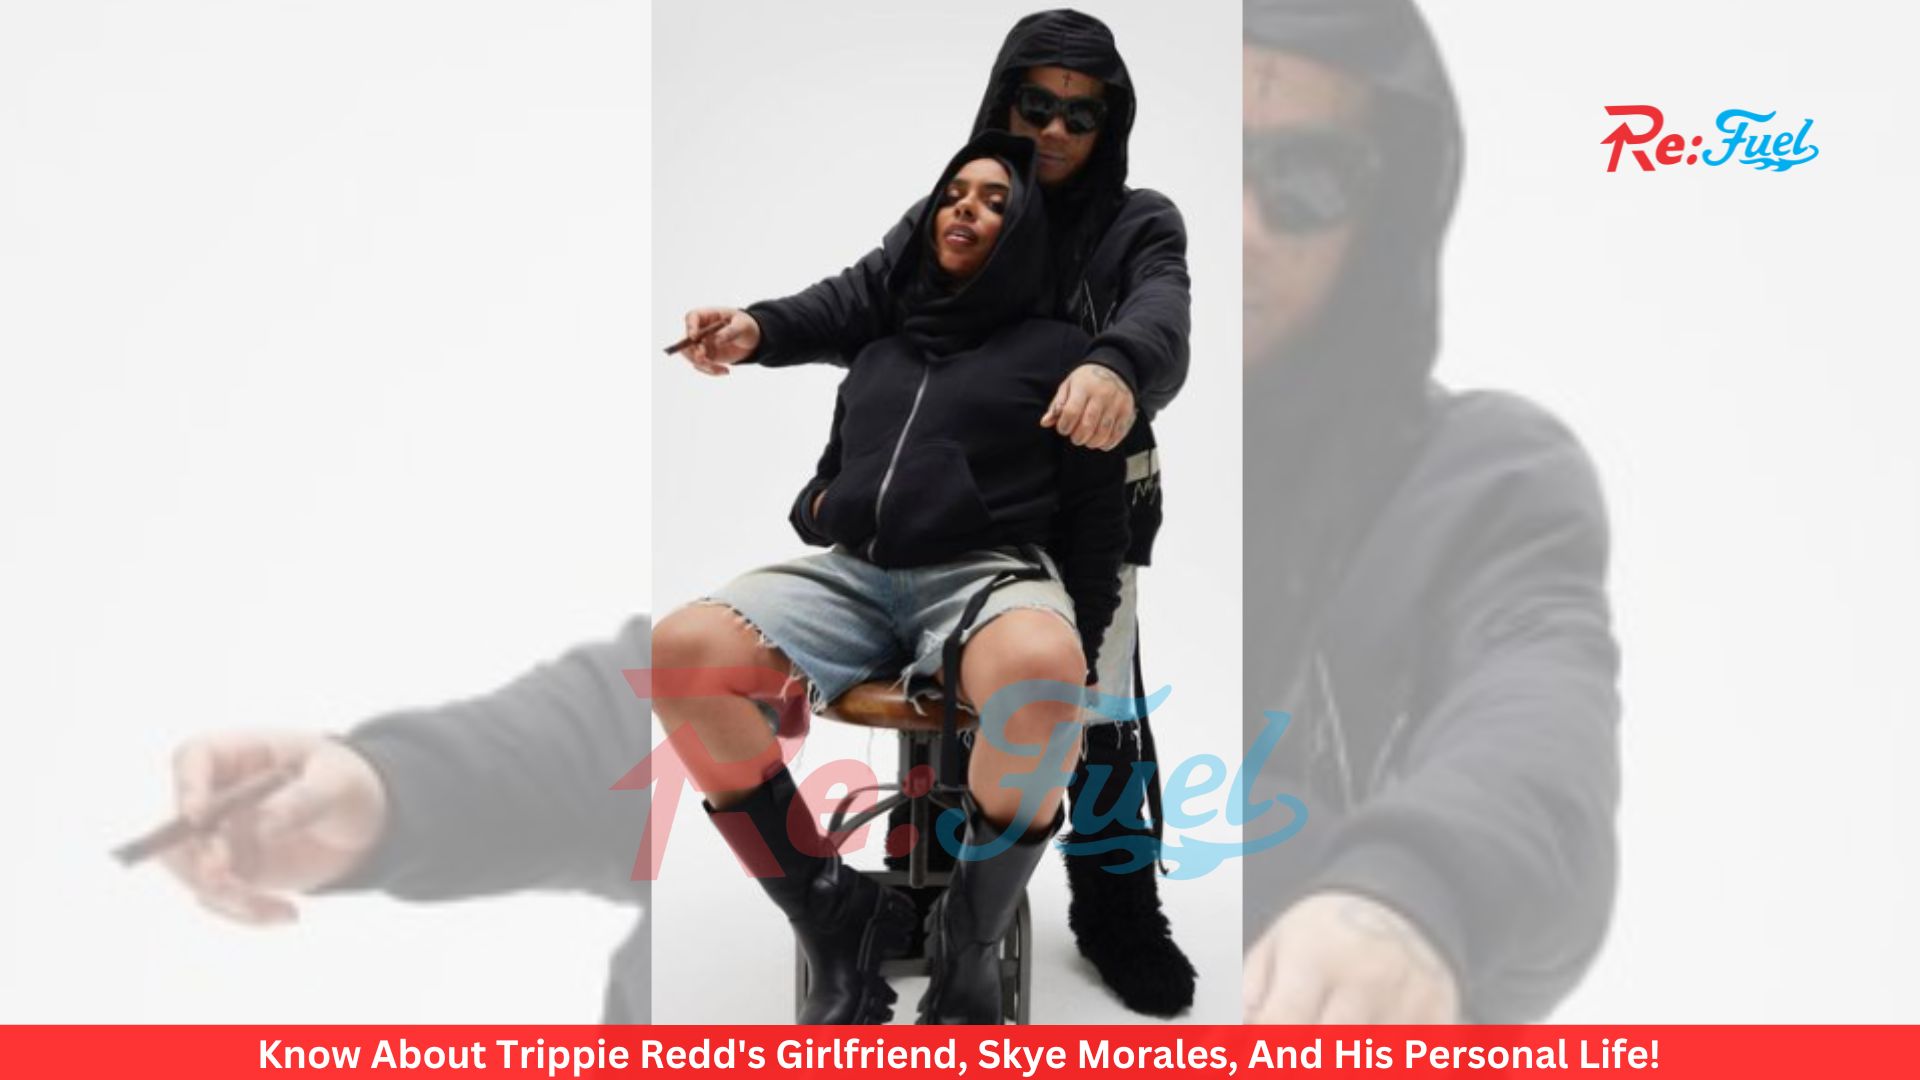 Know About Trippie Redd's Girlfriend, Skye Morales, And His Personal Life!